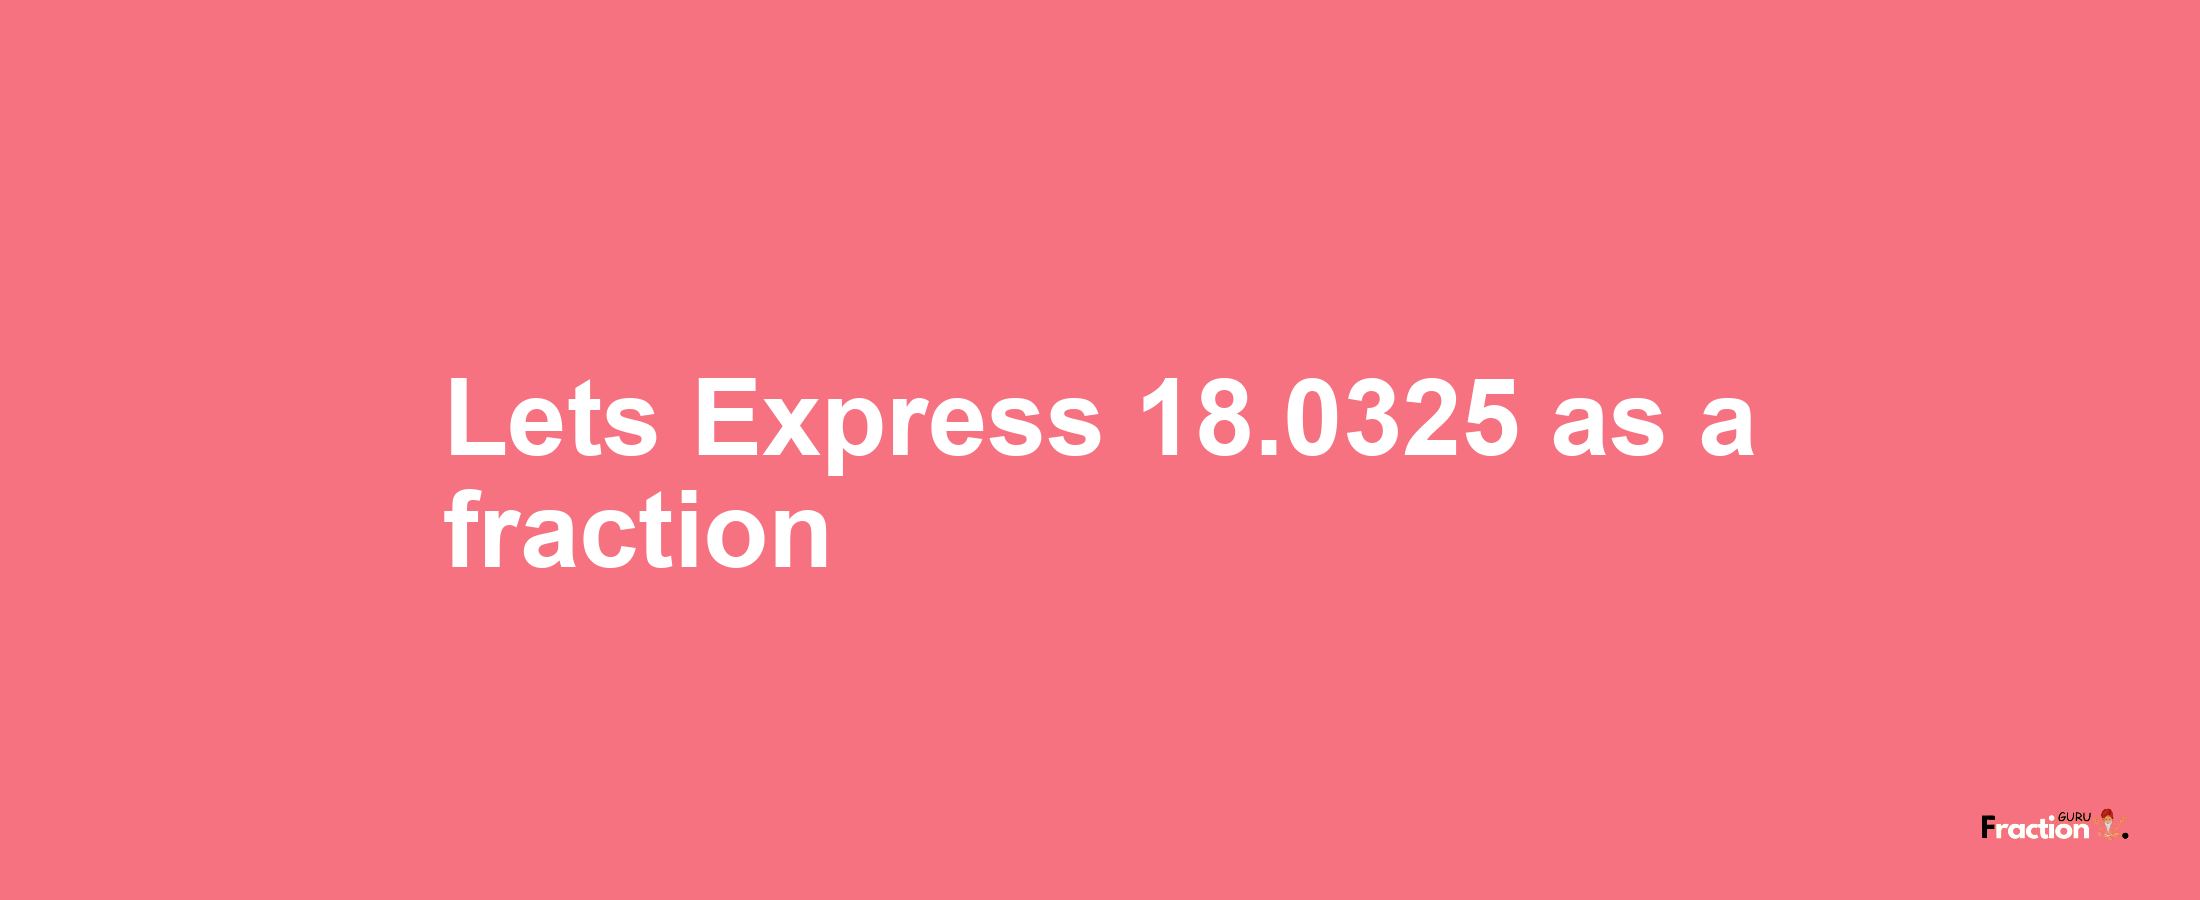 Lets Express 18.0325 as afraction